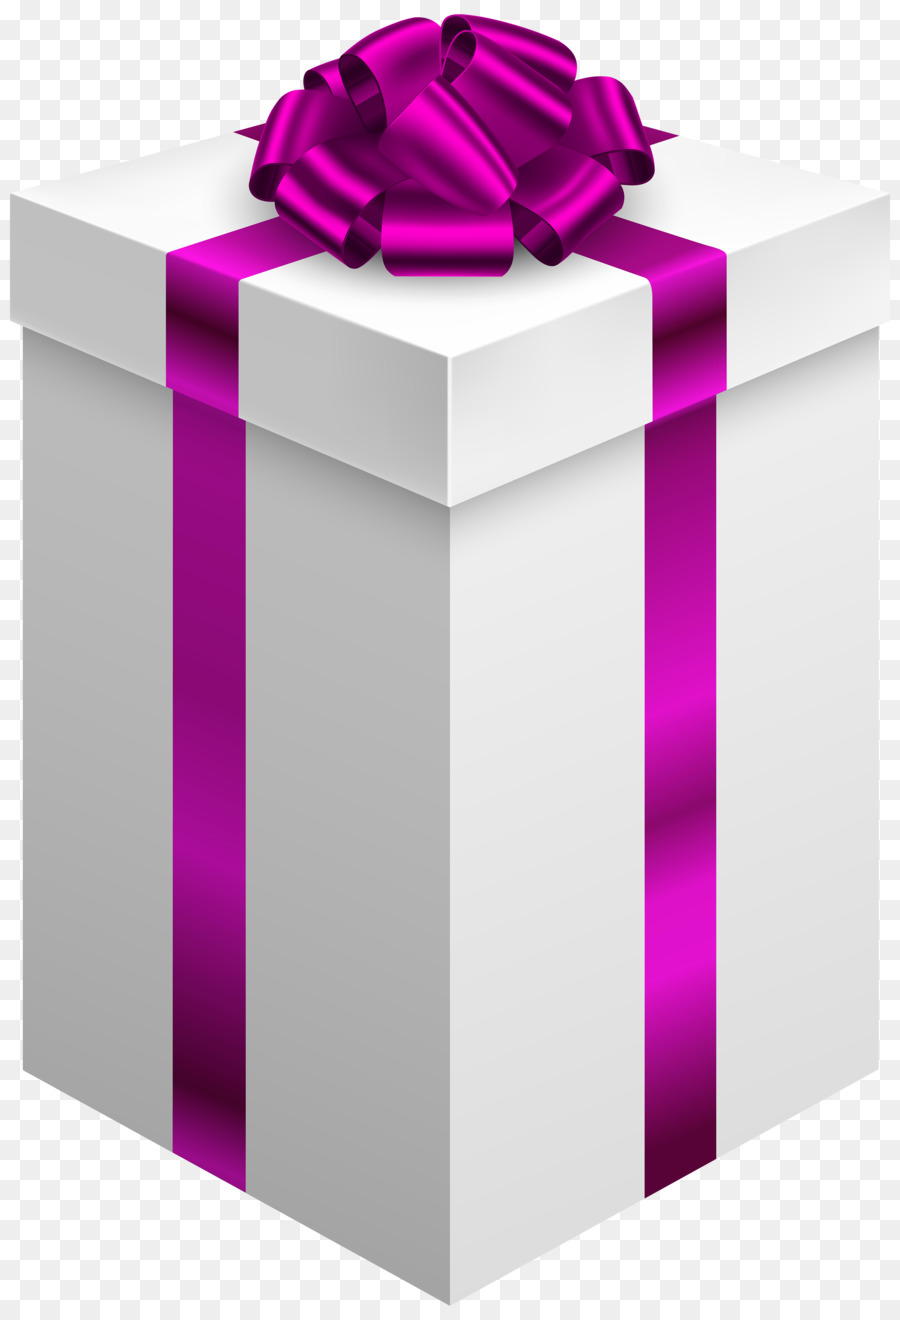 Gift Decorative box Clip art - giftbox png download - 2728*4000 - Free Transparent Gift png Download.